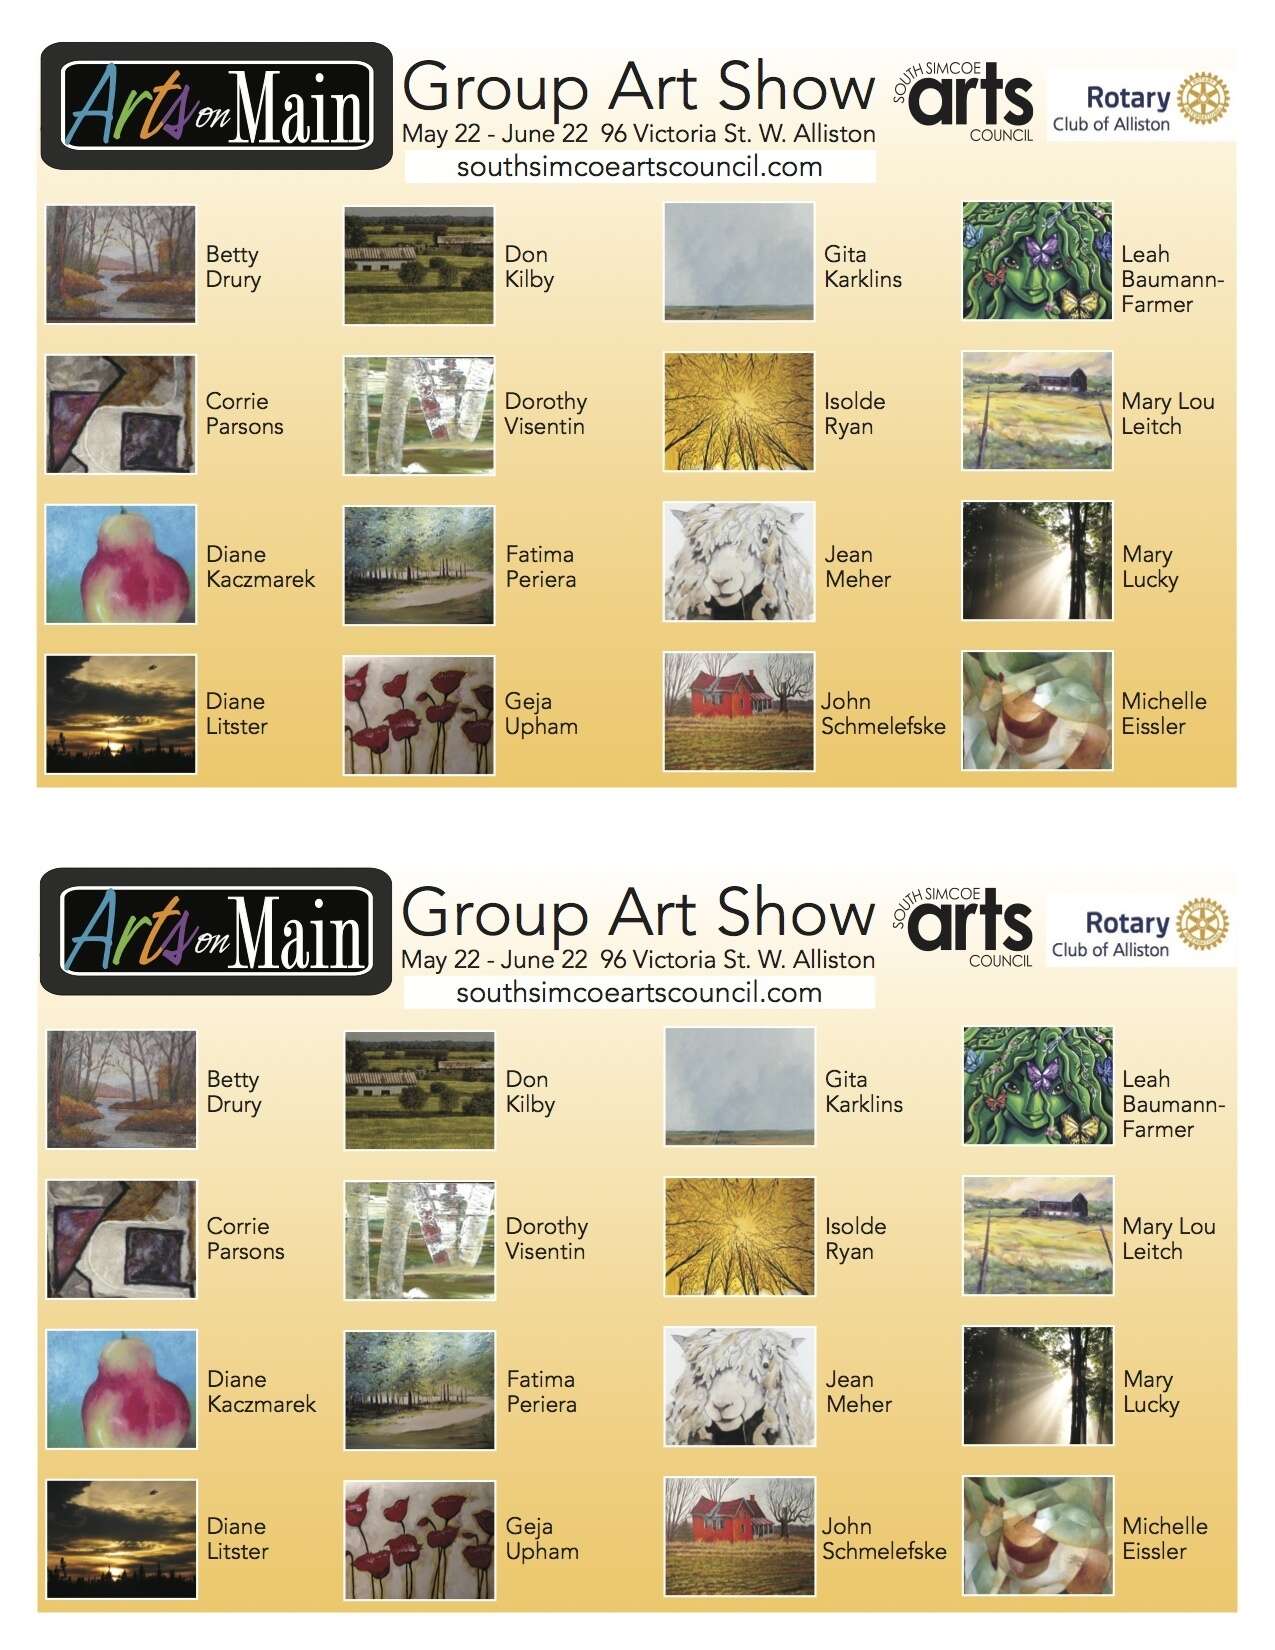 June 20, 2015 BATTLE OF THE BRUSHES  The ABIA has invited our Membership to showcase their artworks by allowing them to set up a table / booth at the  - Experienced Artists Juried / Judged Show 96 Victoria Street West, Unit 4, Alliston, ON